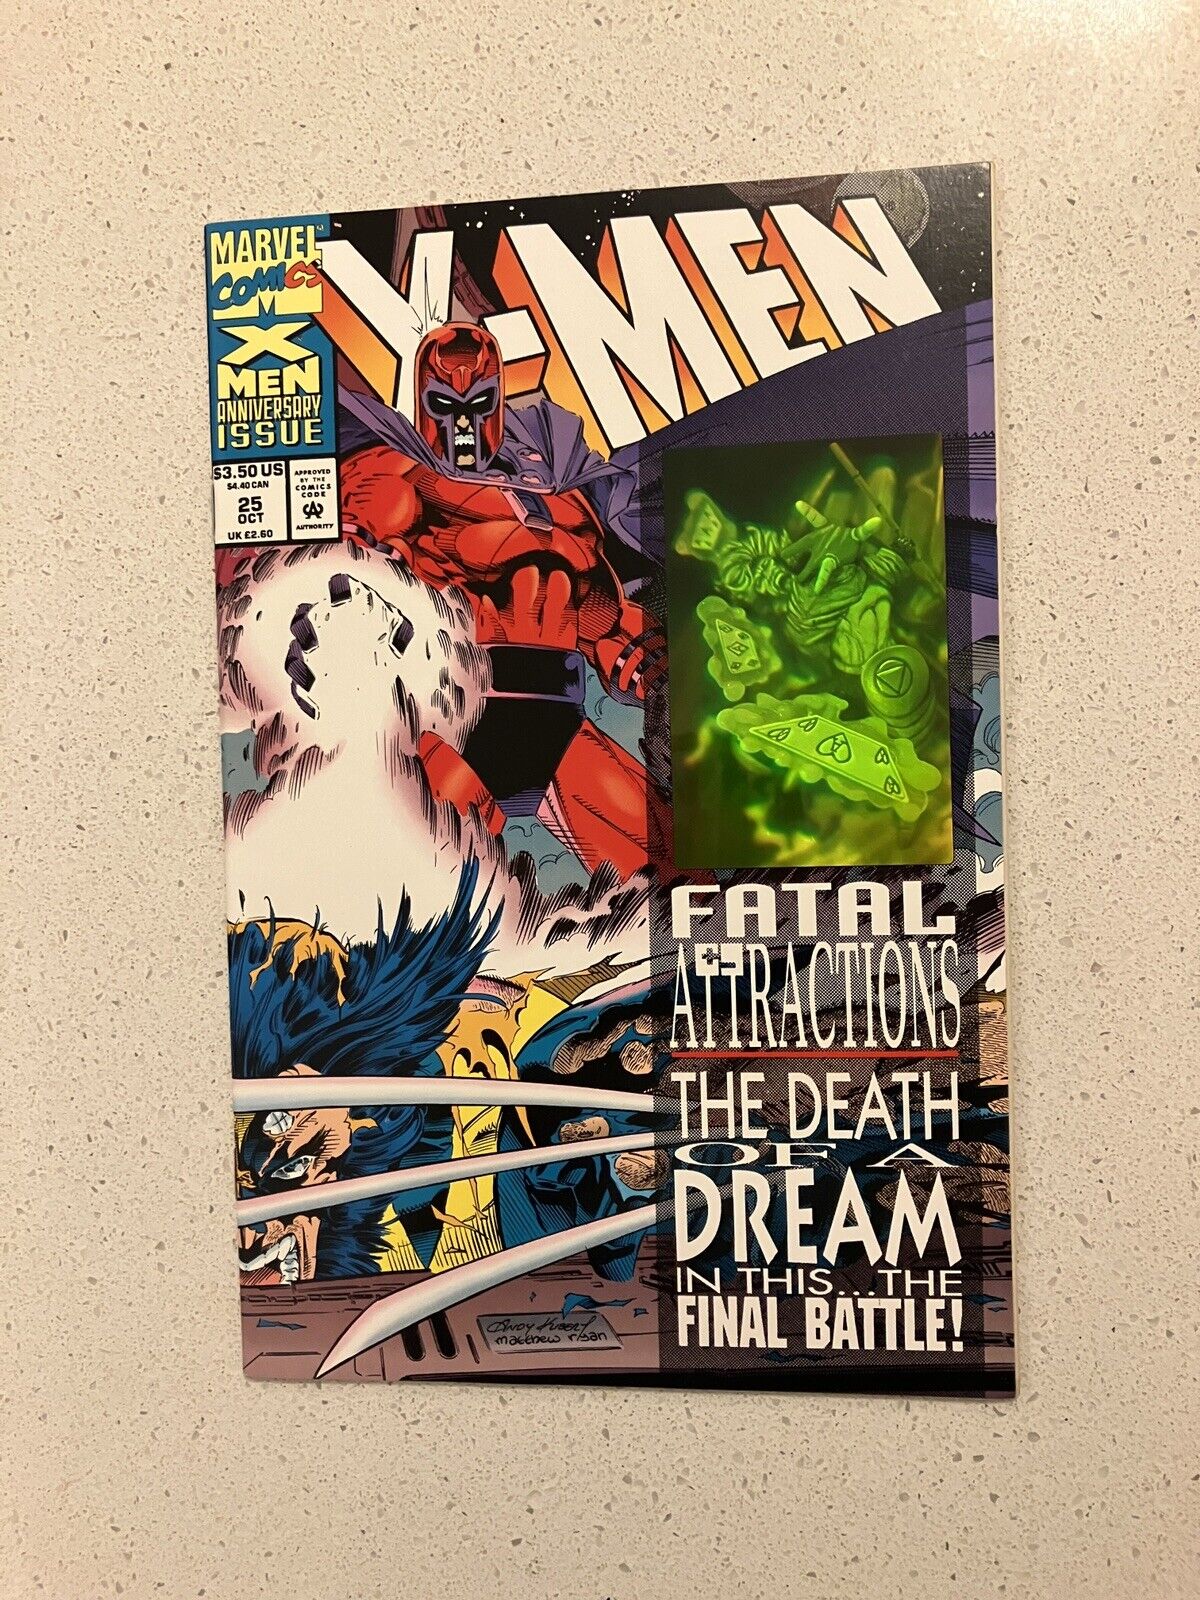 X-Men #25 (1993) | NM | Hologram Cover | Fatal Attractions | HOT ISSUE 🔥🔥